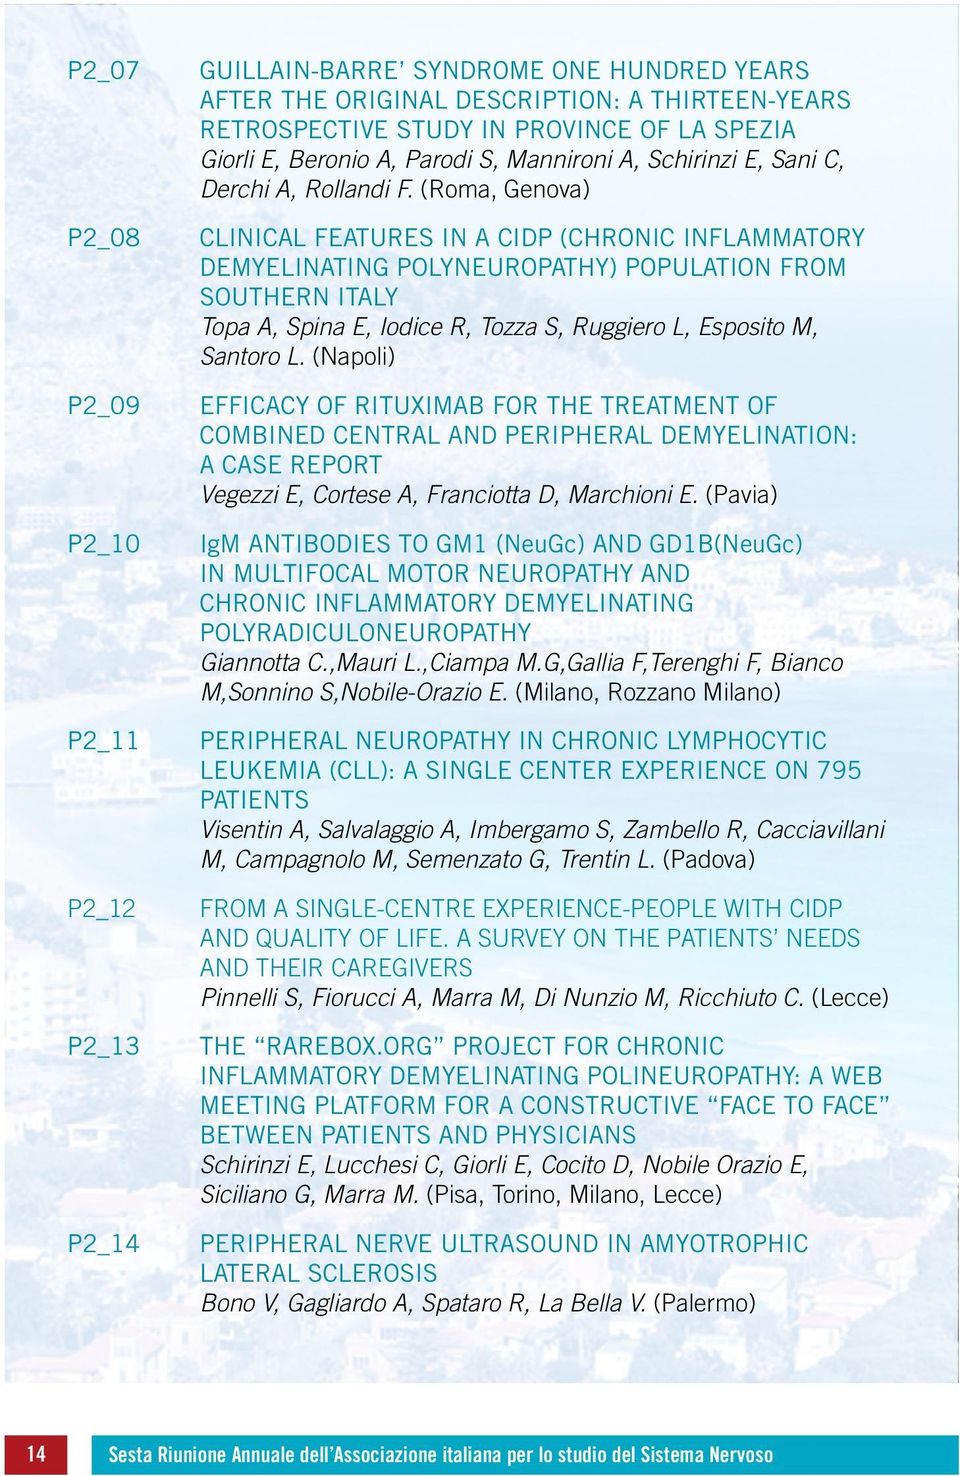 (Roma, Genova) CLINICAL FEATURES IN A CIDP (CHRONIC INFLAMMATORY DEMYELINATING POLYNEUROPATHY) POPULATION FROM SOUTHERN ITALY Topa A, Spina E, Iodice R, Tozza S, Ruggiero L, Esposito M, Santoro L.